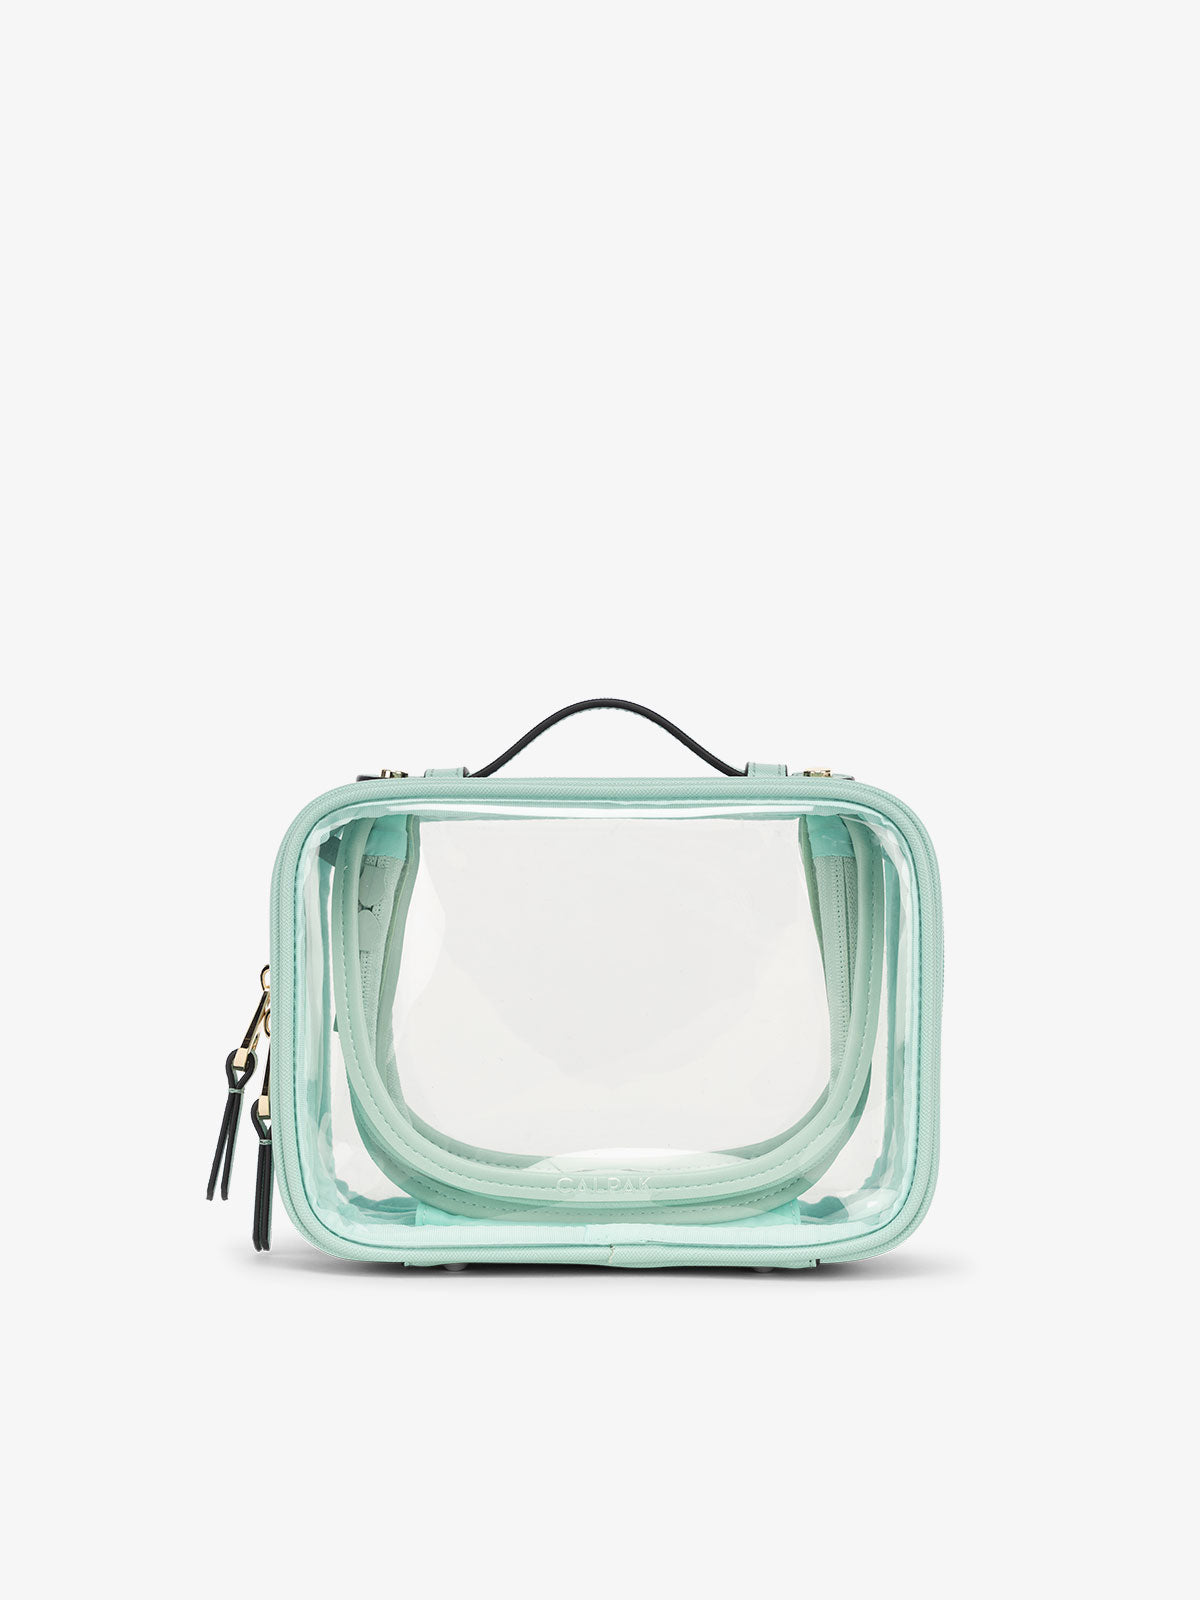 CALPAK small clear makeup bag with zippered compartments in  aqua